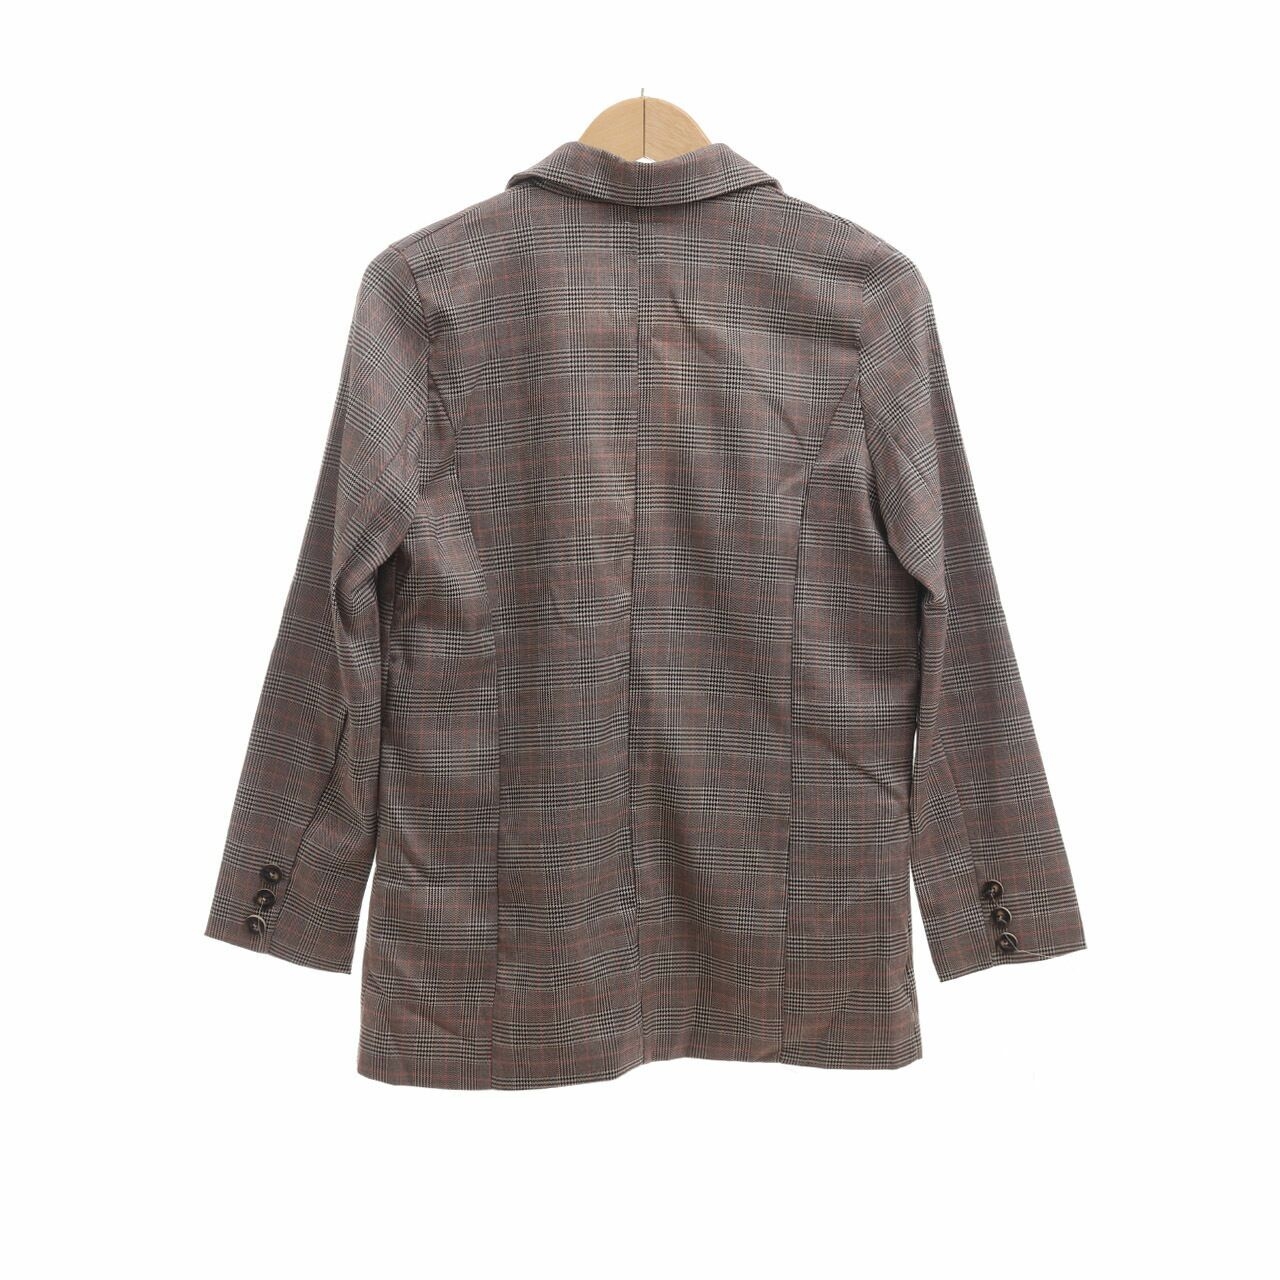 Day by Love and Flair Brown Houndstooth Blazer